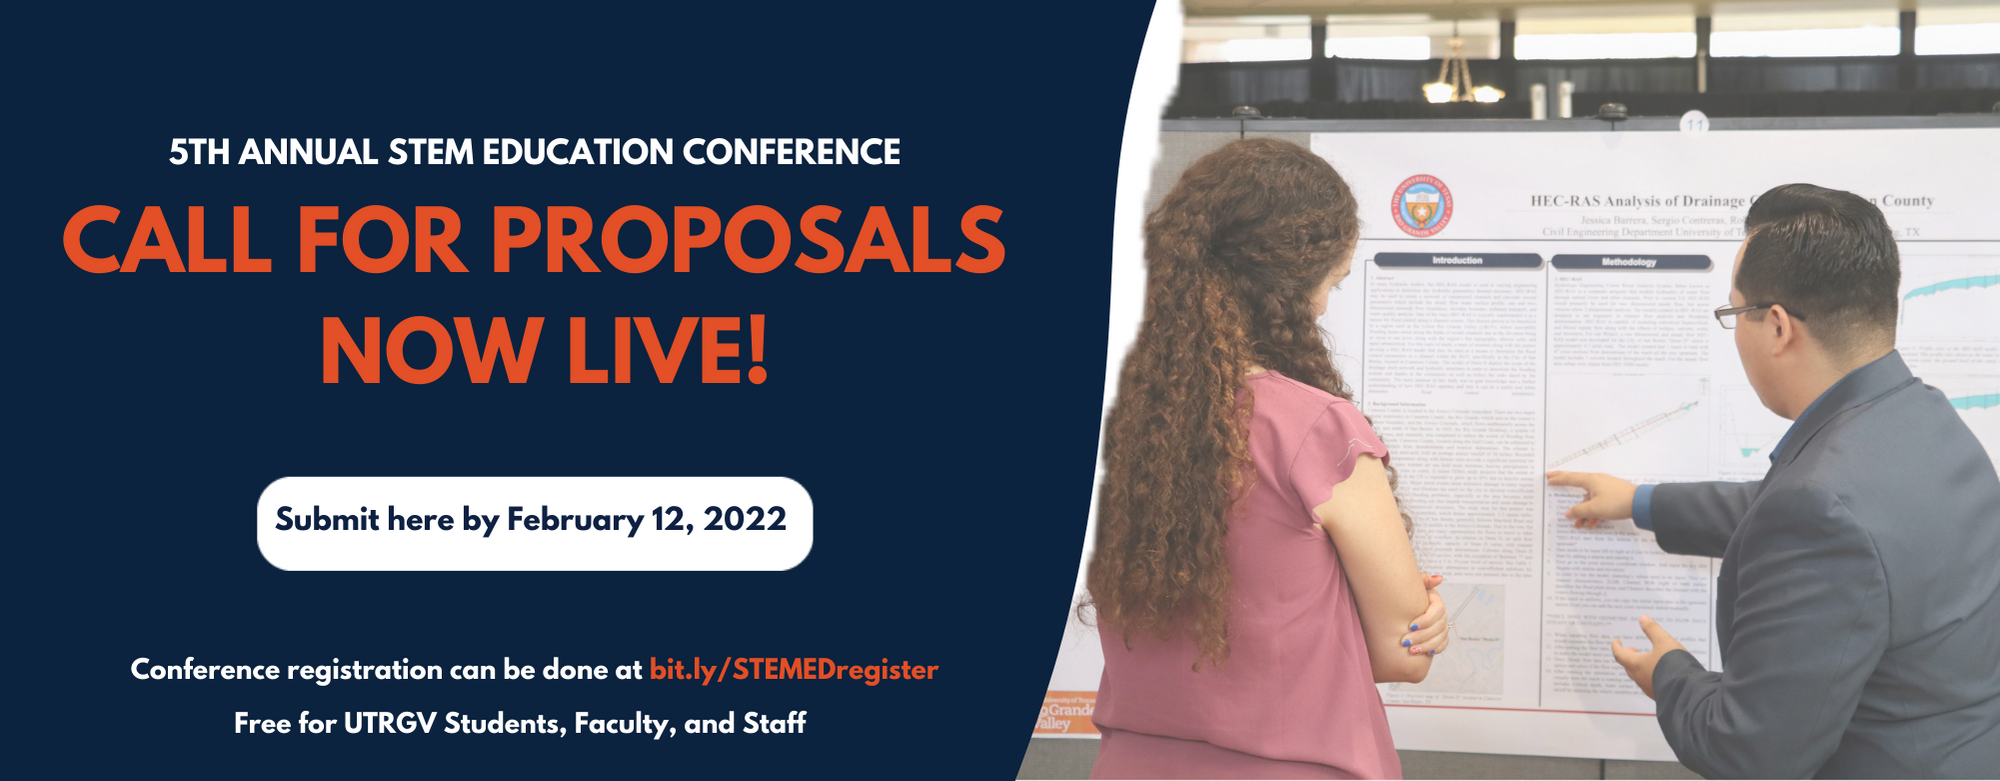 STEM ED - Call for Proposals